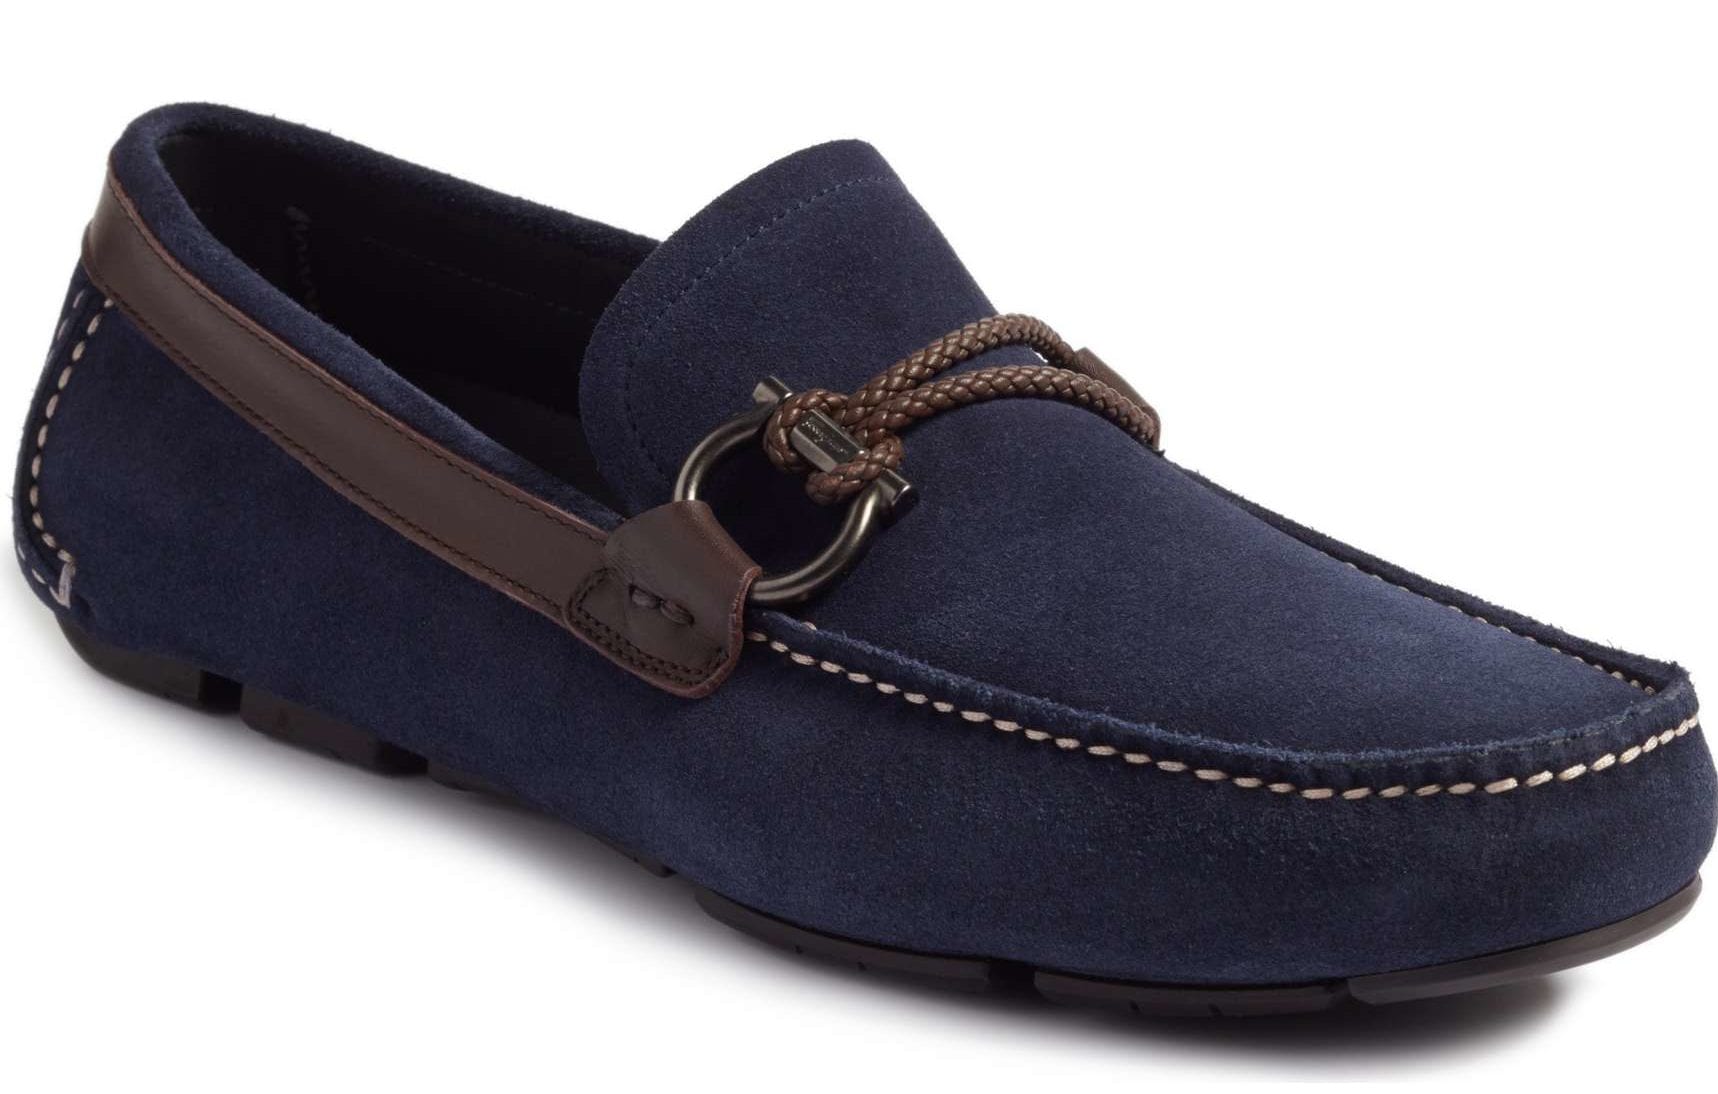 New Blue Suede Driving Shoes for Men 2017 - 2018